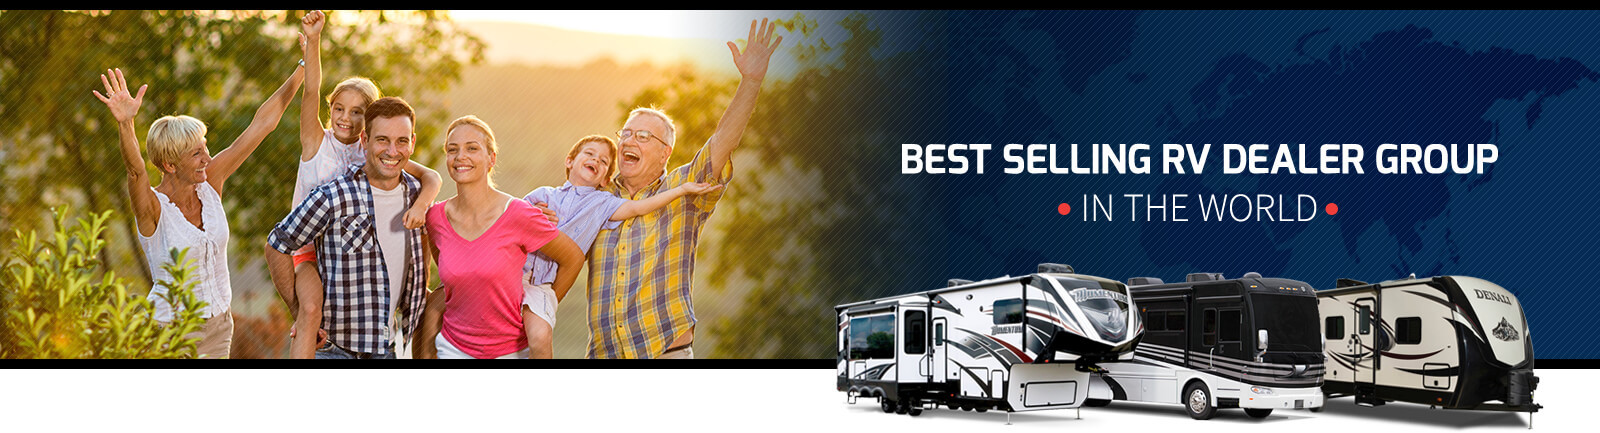 About Priority RV Network | Family with Kids | Best Selling RV Dealer Group